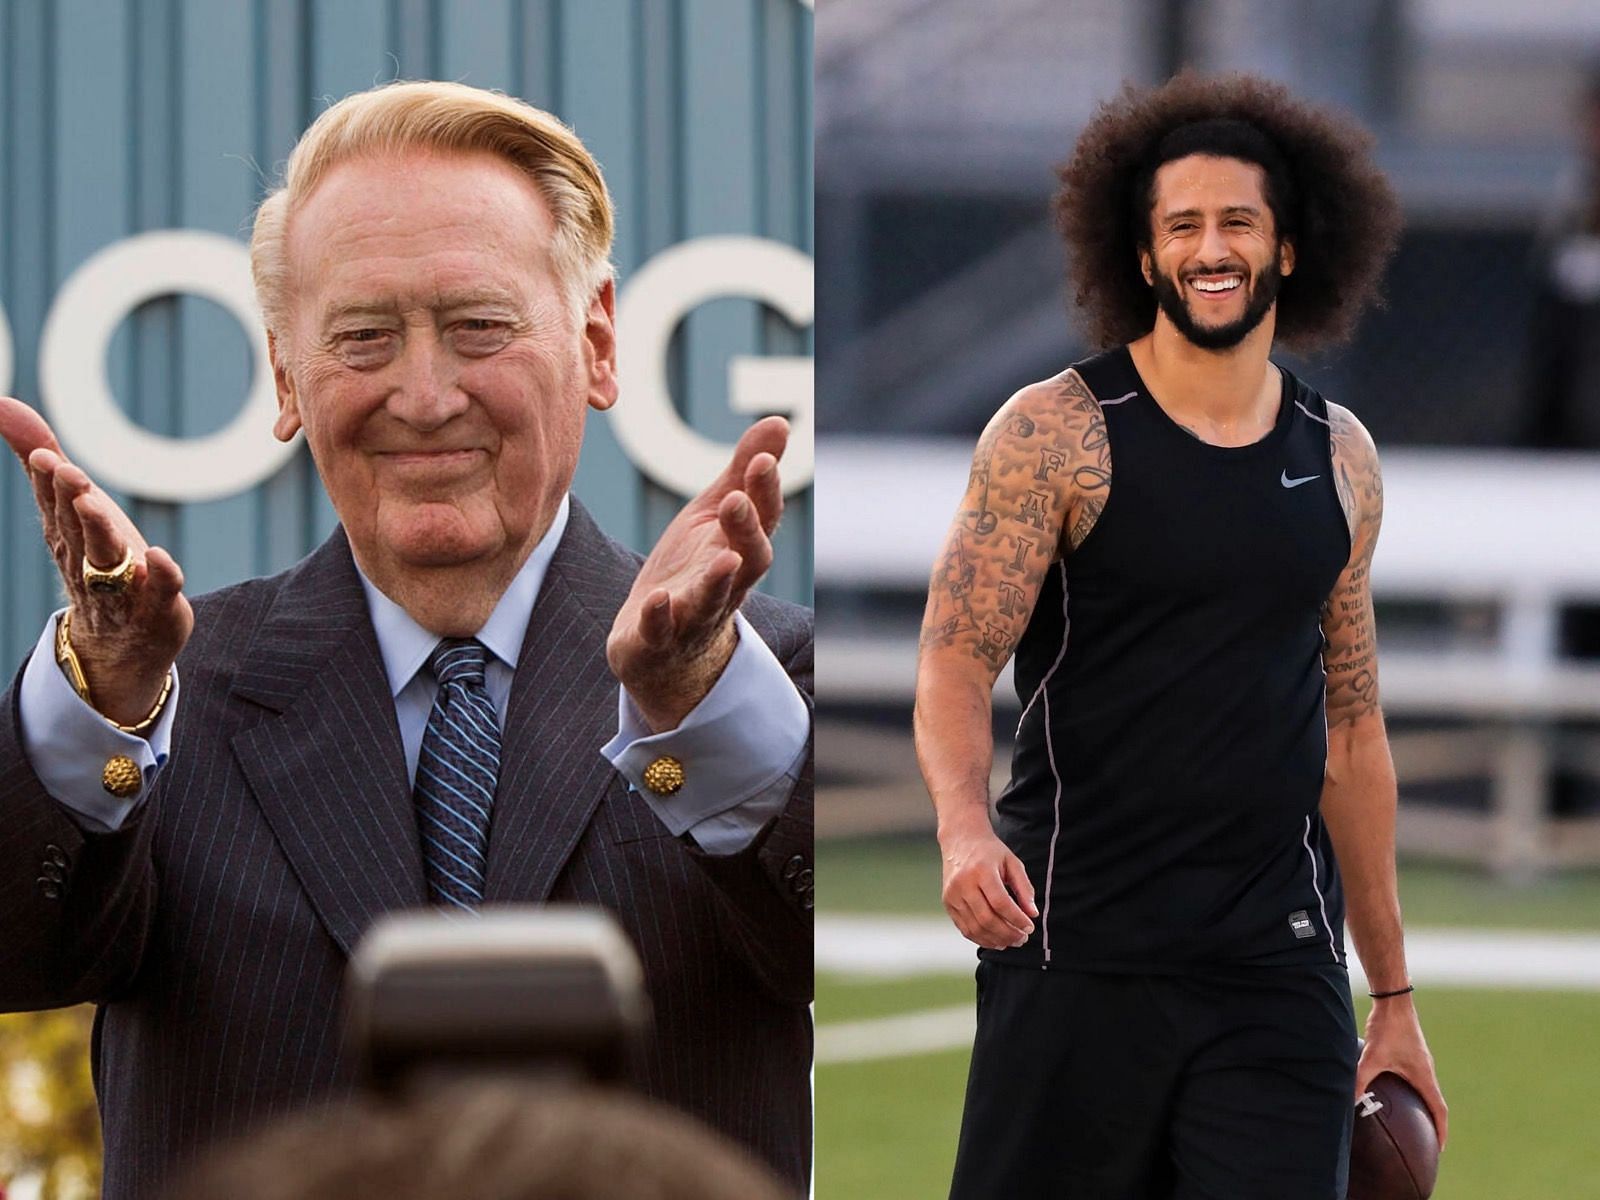 Vin Scully boycotted the NFL over anthem protests by Colin Kaepernick